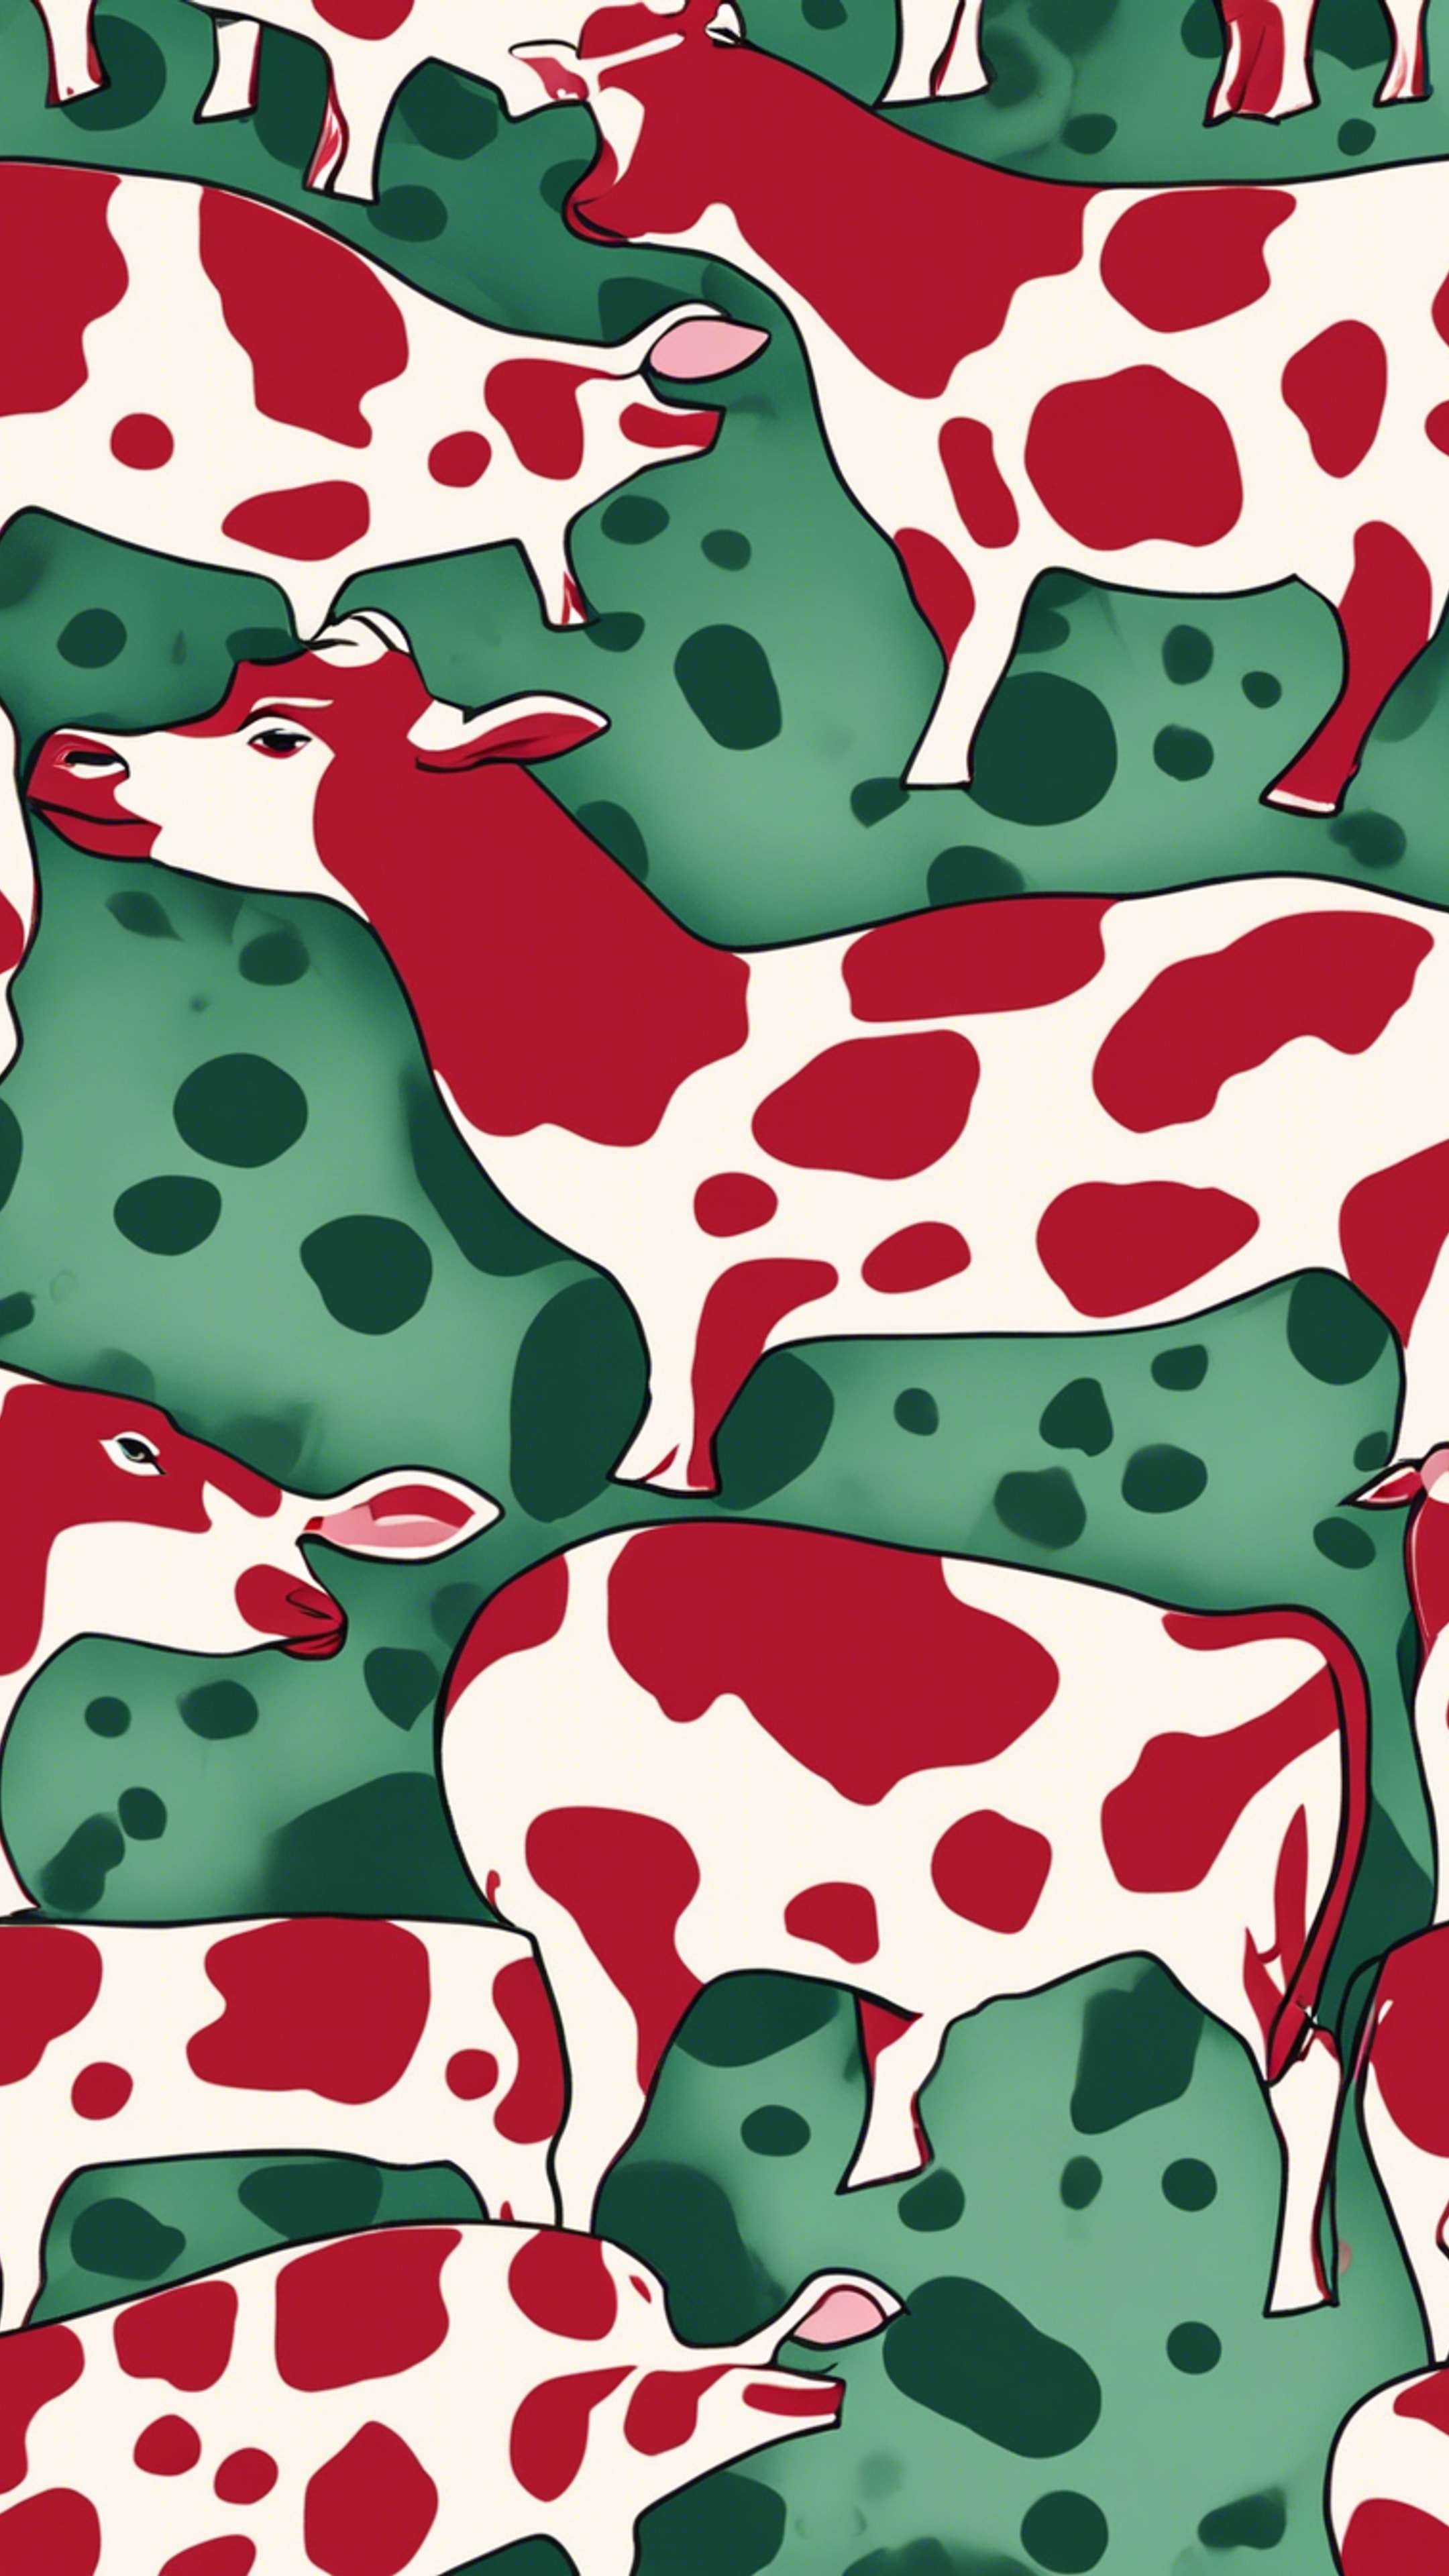 A dynamic, textured pattern of red and green cow spots. Дэлгэцийн зураг[159333102a774de6a0e2]